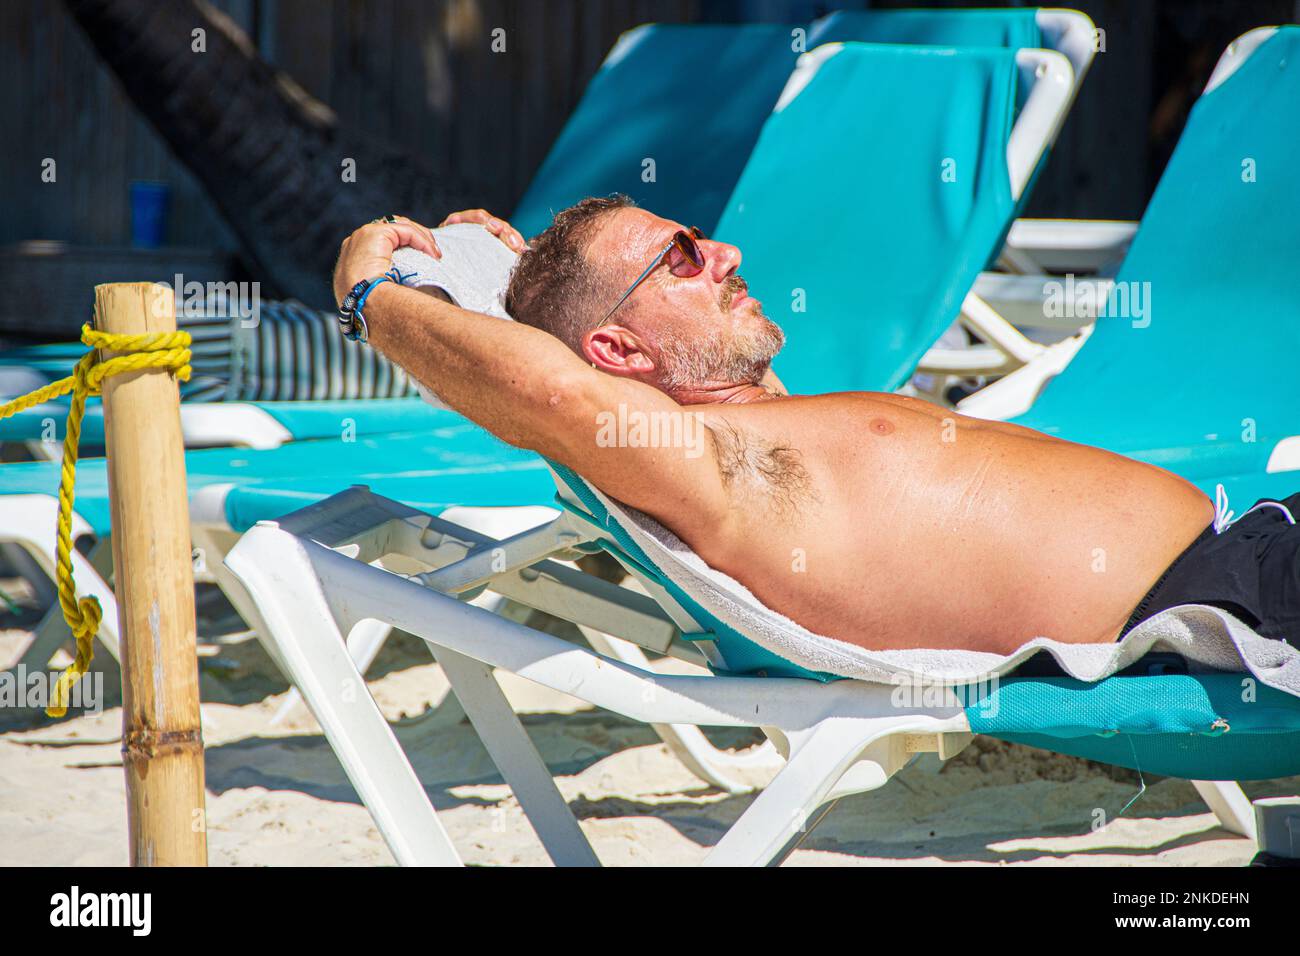 A middle-aged, caucasian man wearing glasses stretched out on a lounge chair, Roatan, Honduras. Stock Photo